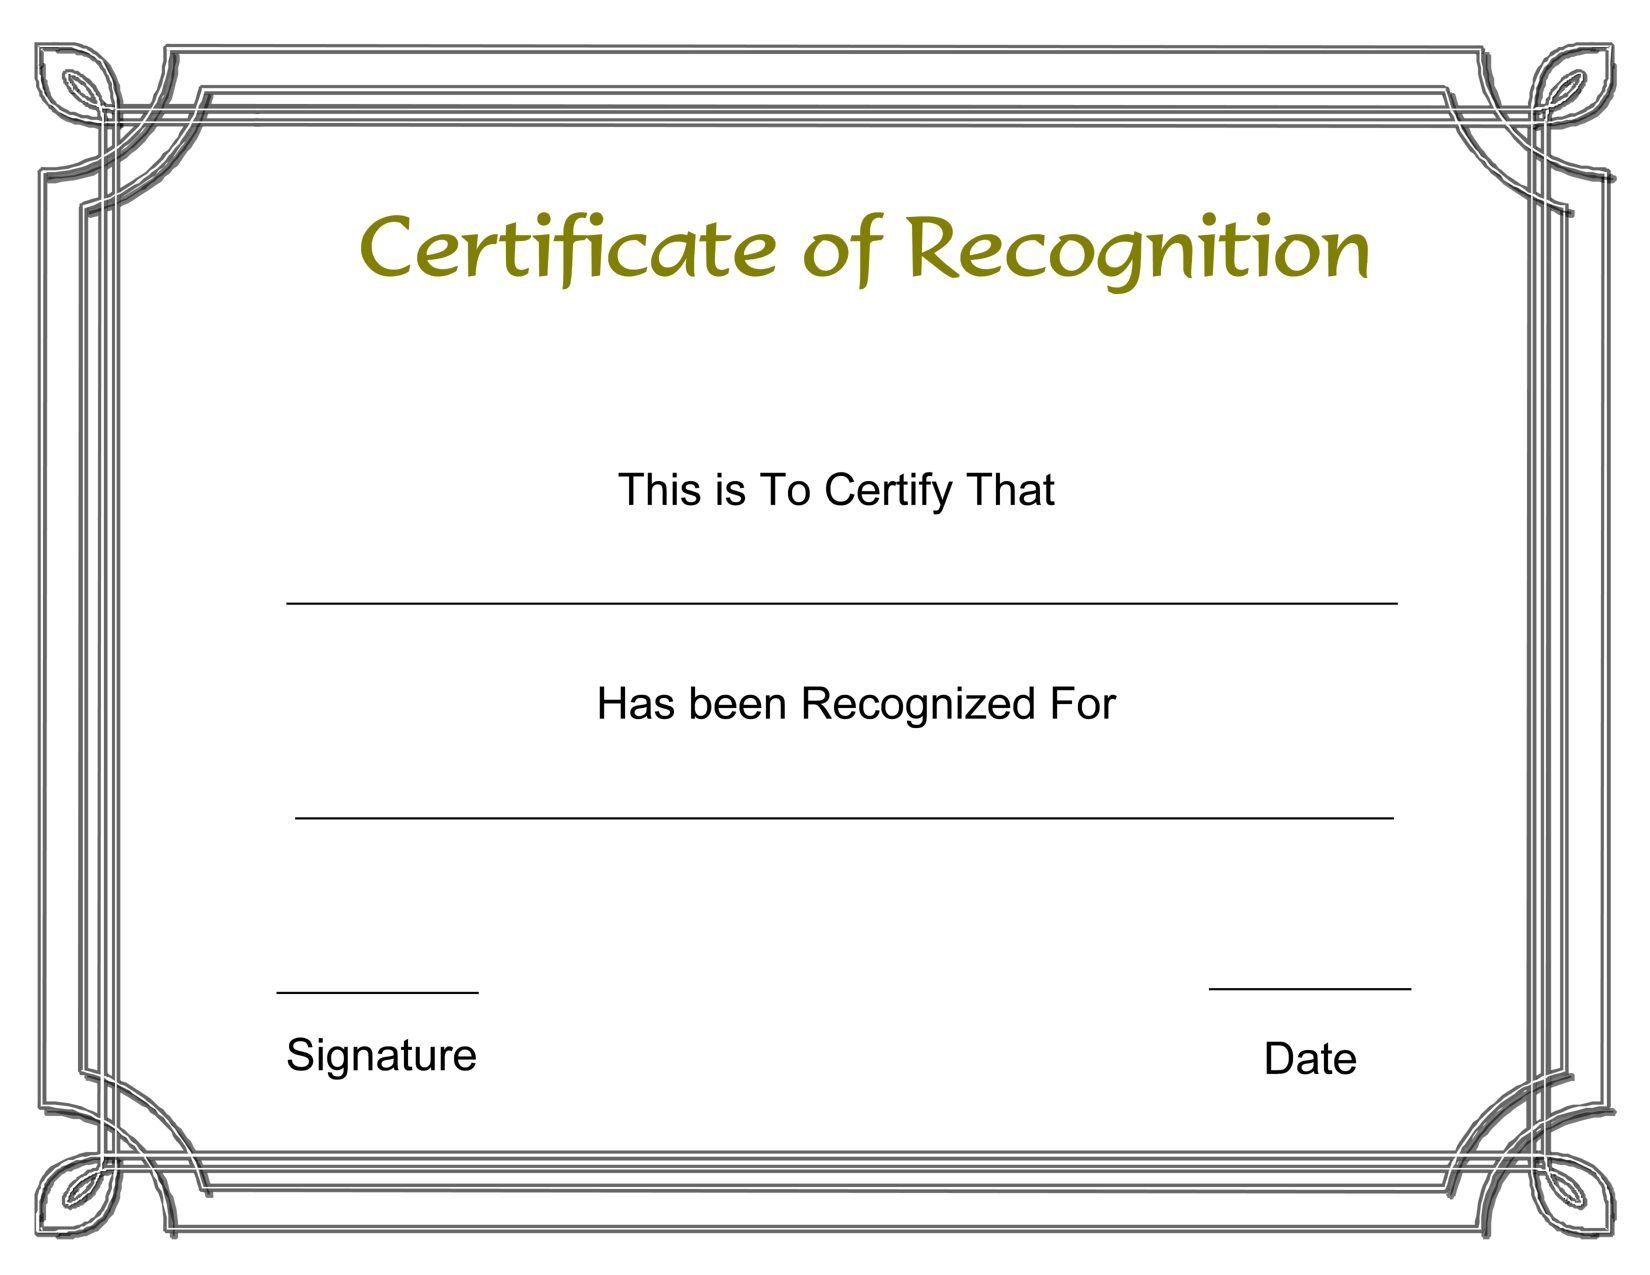 Certificate Template Recognition | Safebest.xyz Within Blank Award Certificate Templates Word